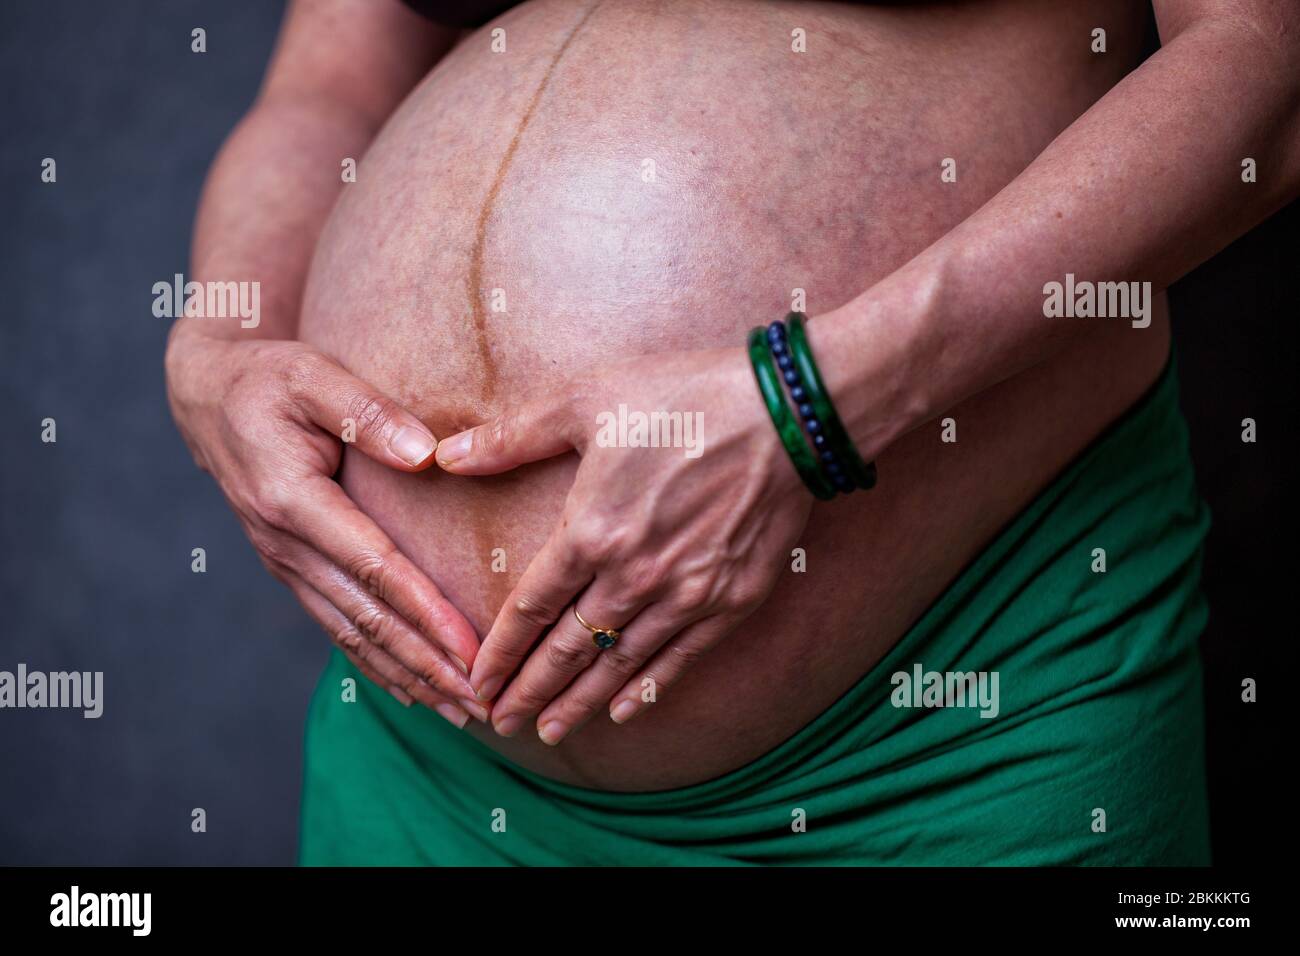 Stomach of a pregnant woman in the third trimester with her hands over fetus in the shape of a heart Stock Photo